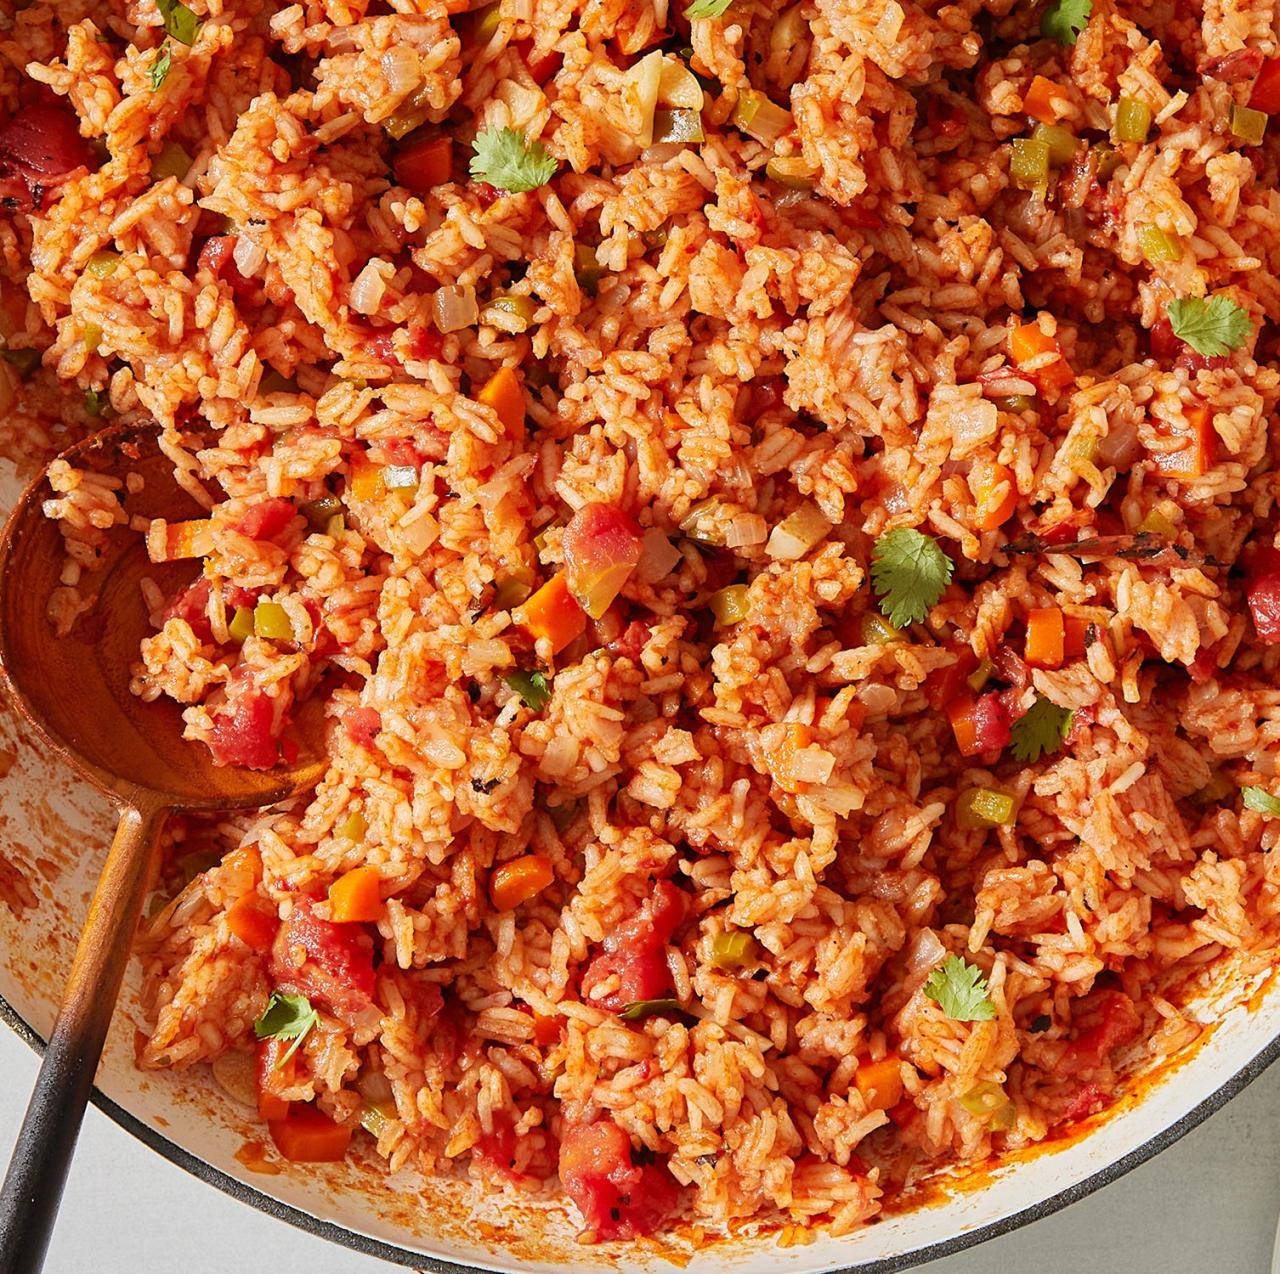 Best Mexican Rice Recipe - How To Make Authentic Mexican Rice